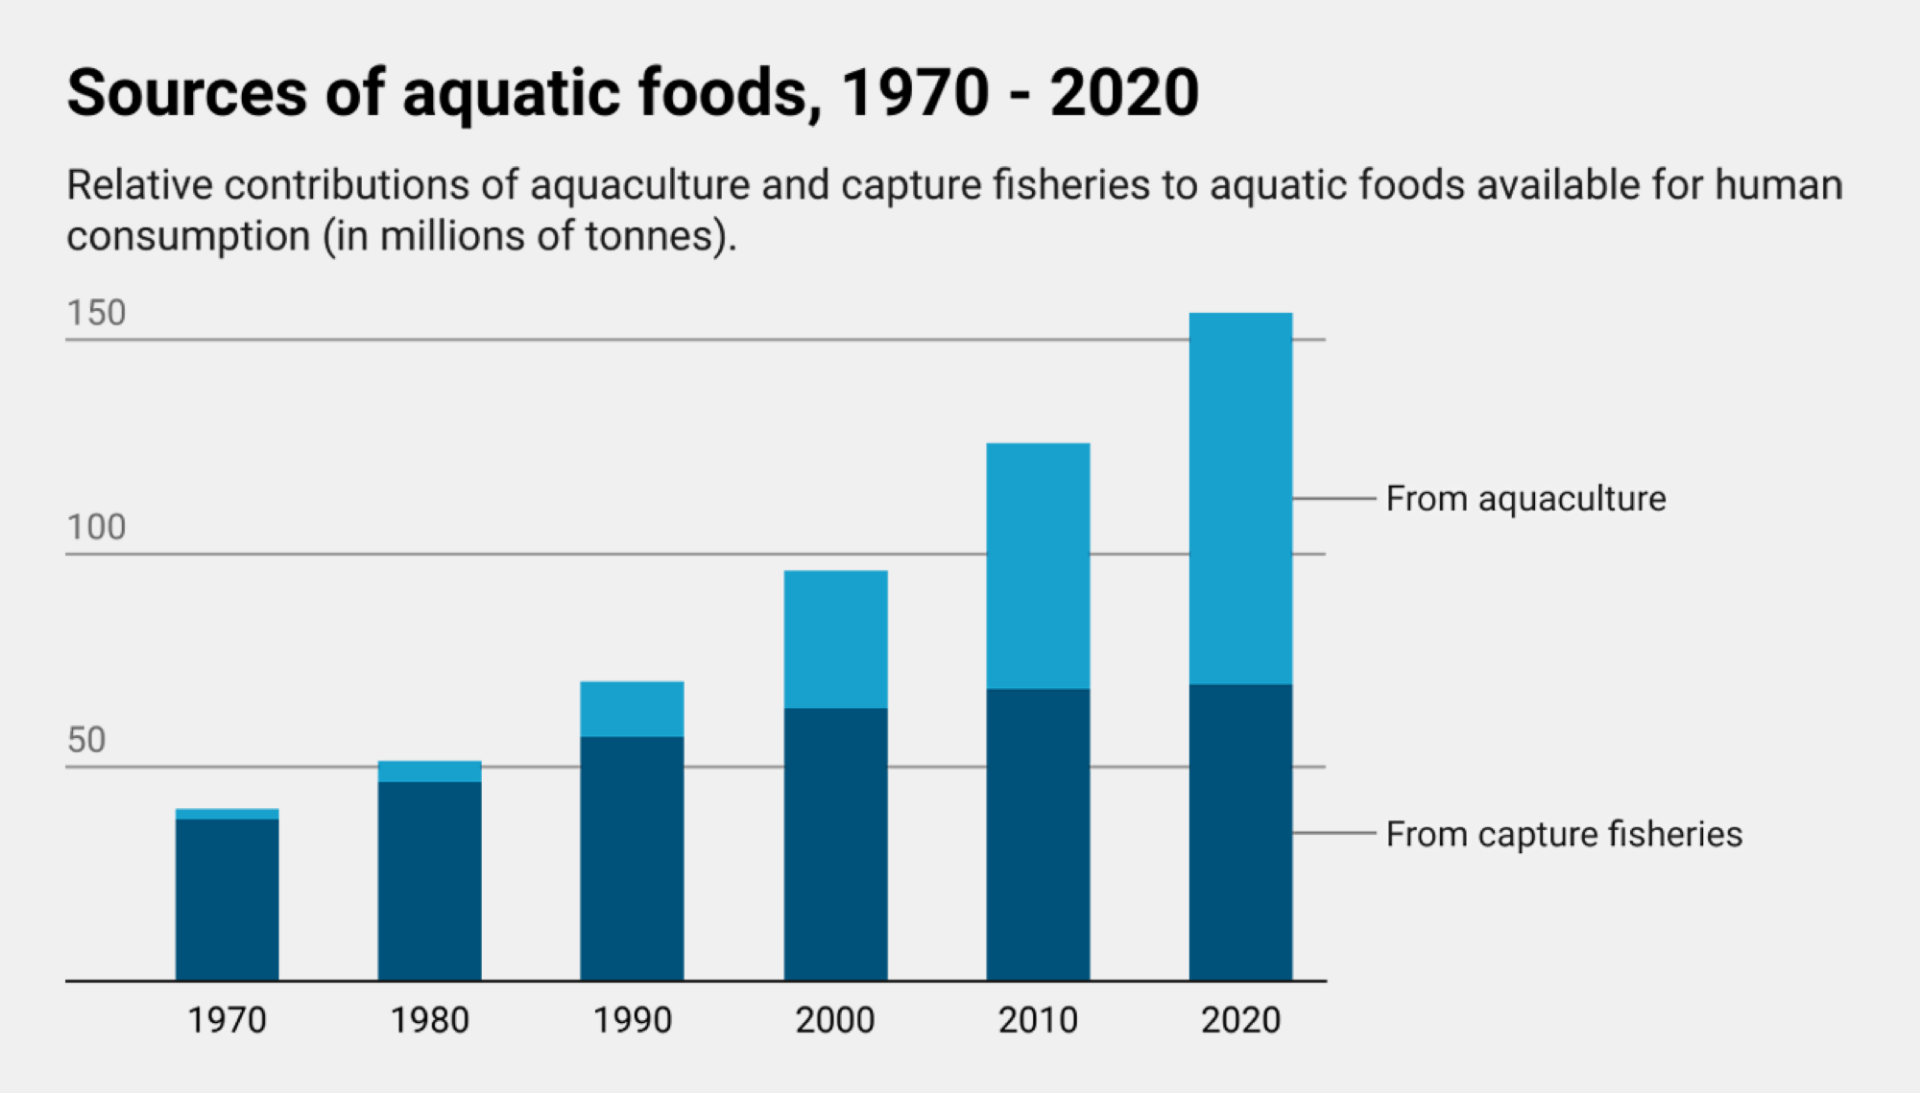 Global consumption of aquatic foods from aquaculture has risen steadily since the 1970s, and now exceeds consumption from capture fisheries. (Chart by Thomas Gaulkin. Source: FAO, "<a href="https://www.fao.org/3/cc0461en/cc0461en.pdf">The state of world fisheries and aquaculture</a>", 2022, p.90; CC BY-NC-SA) 